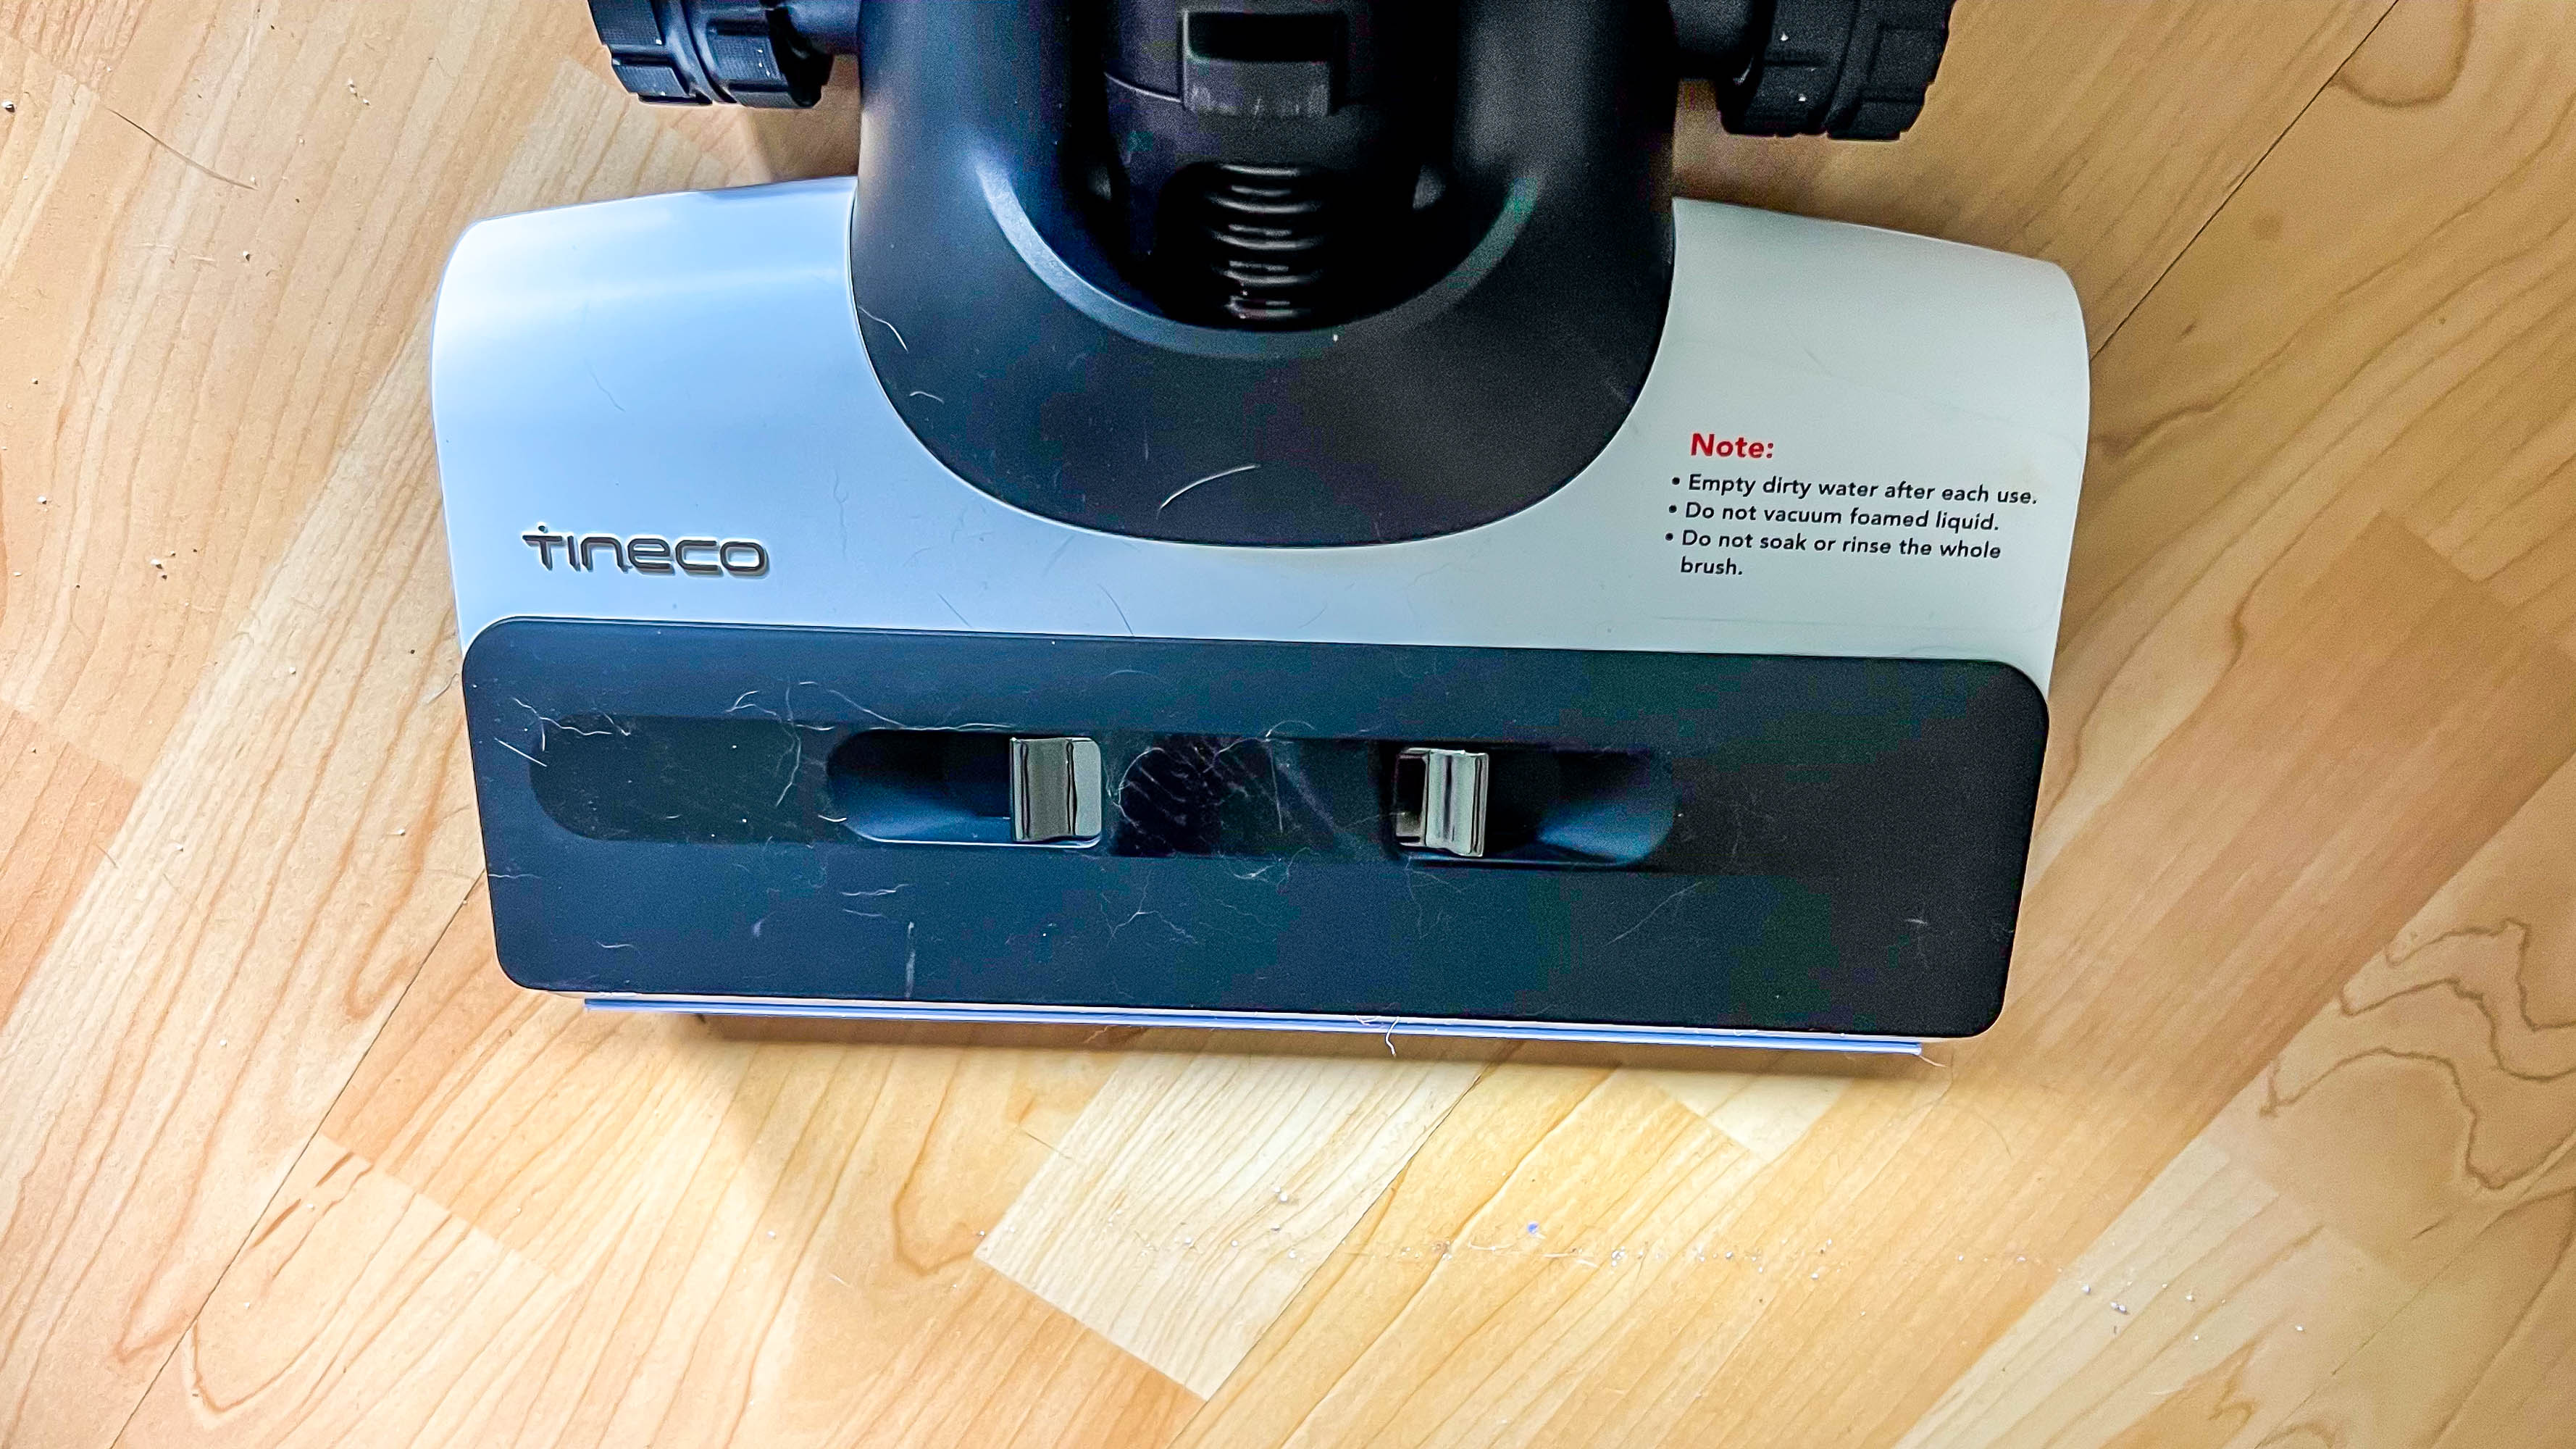 Tineco Floor One S7 Pro in use by author